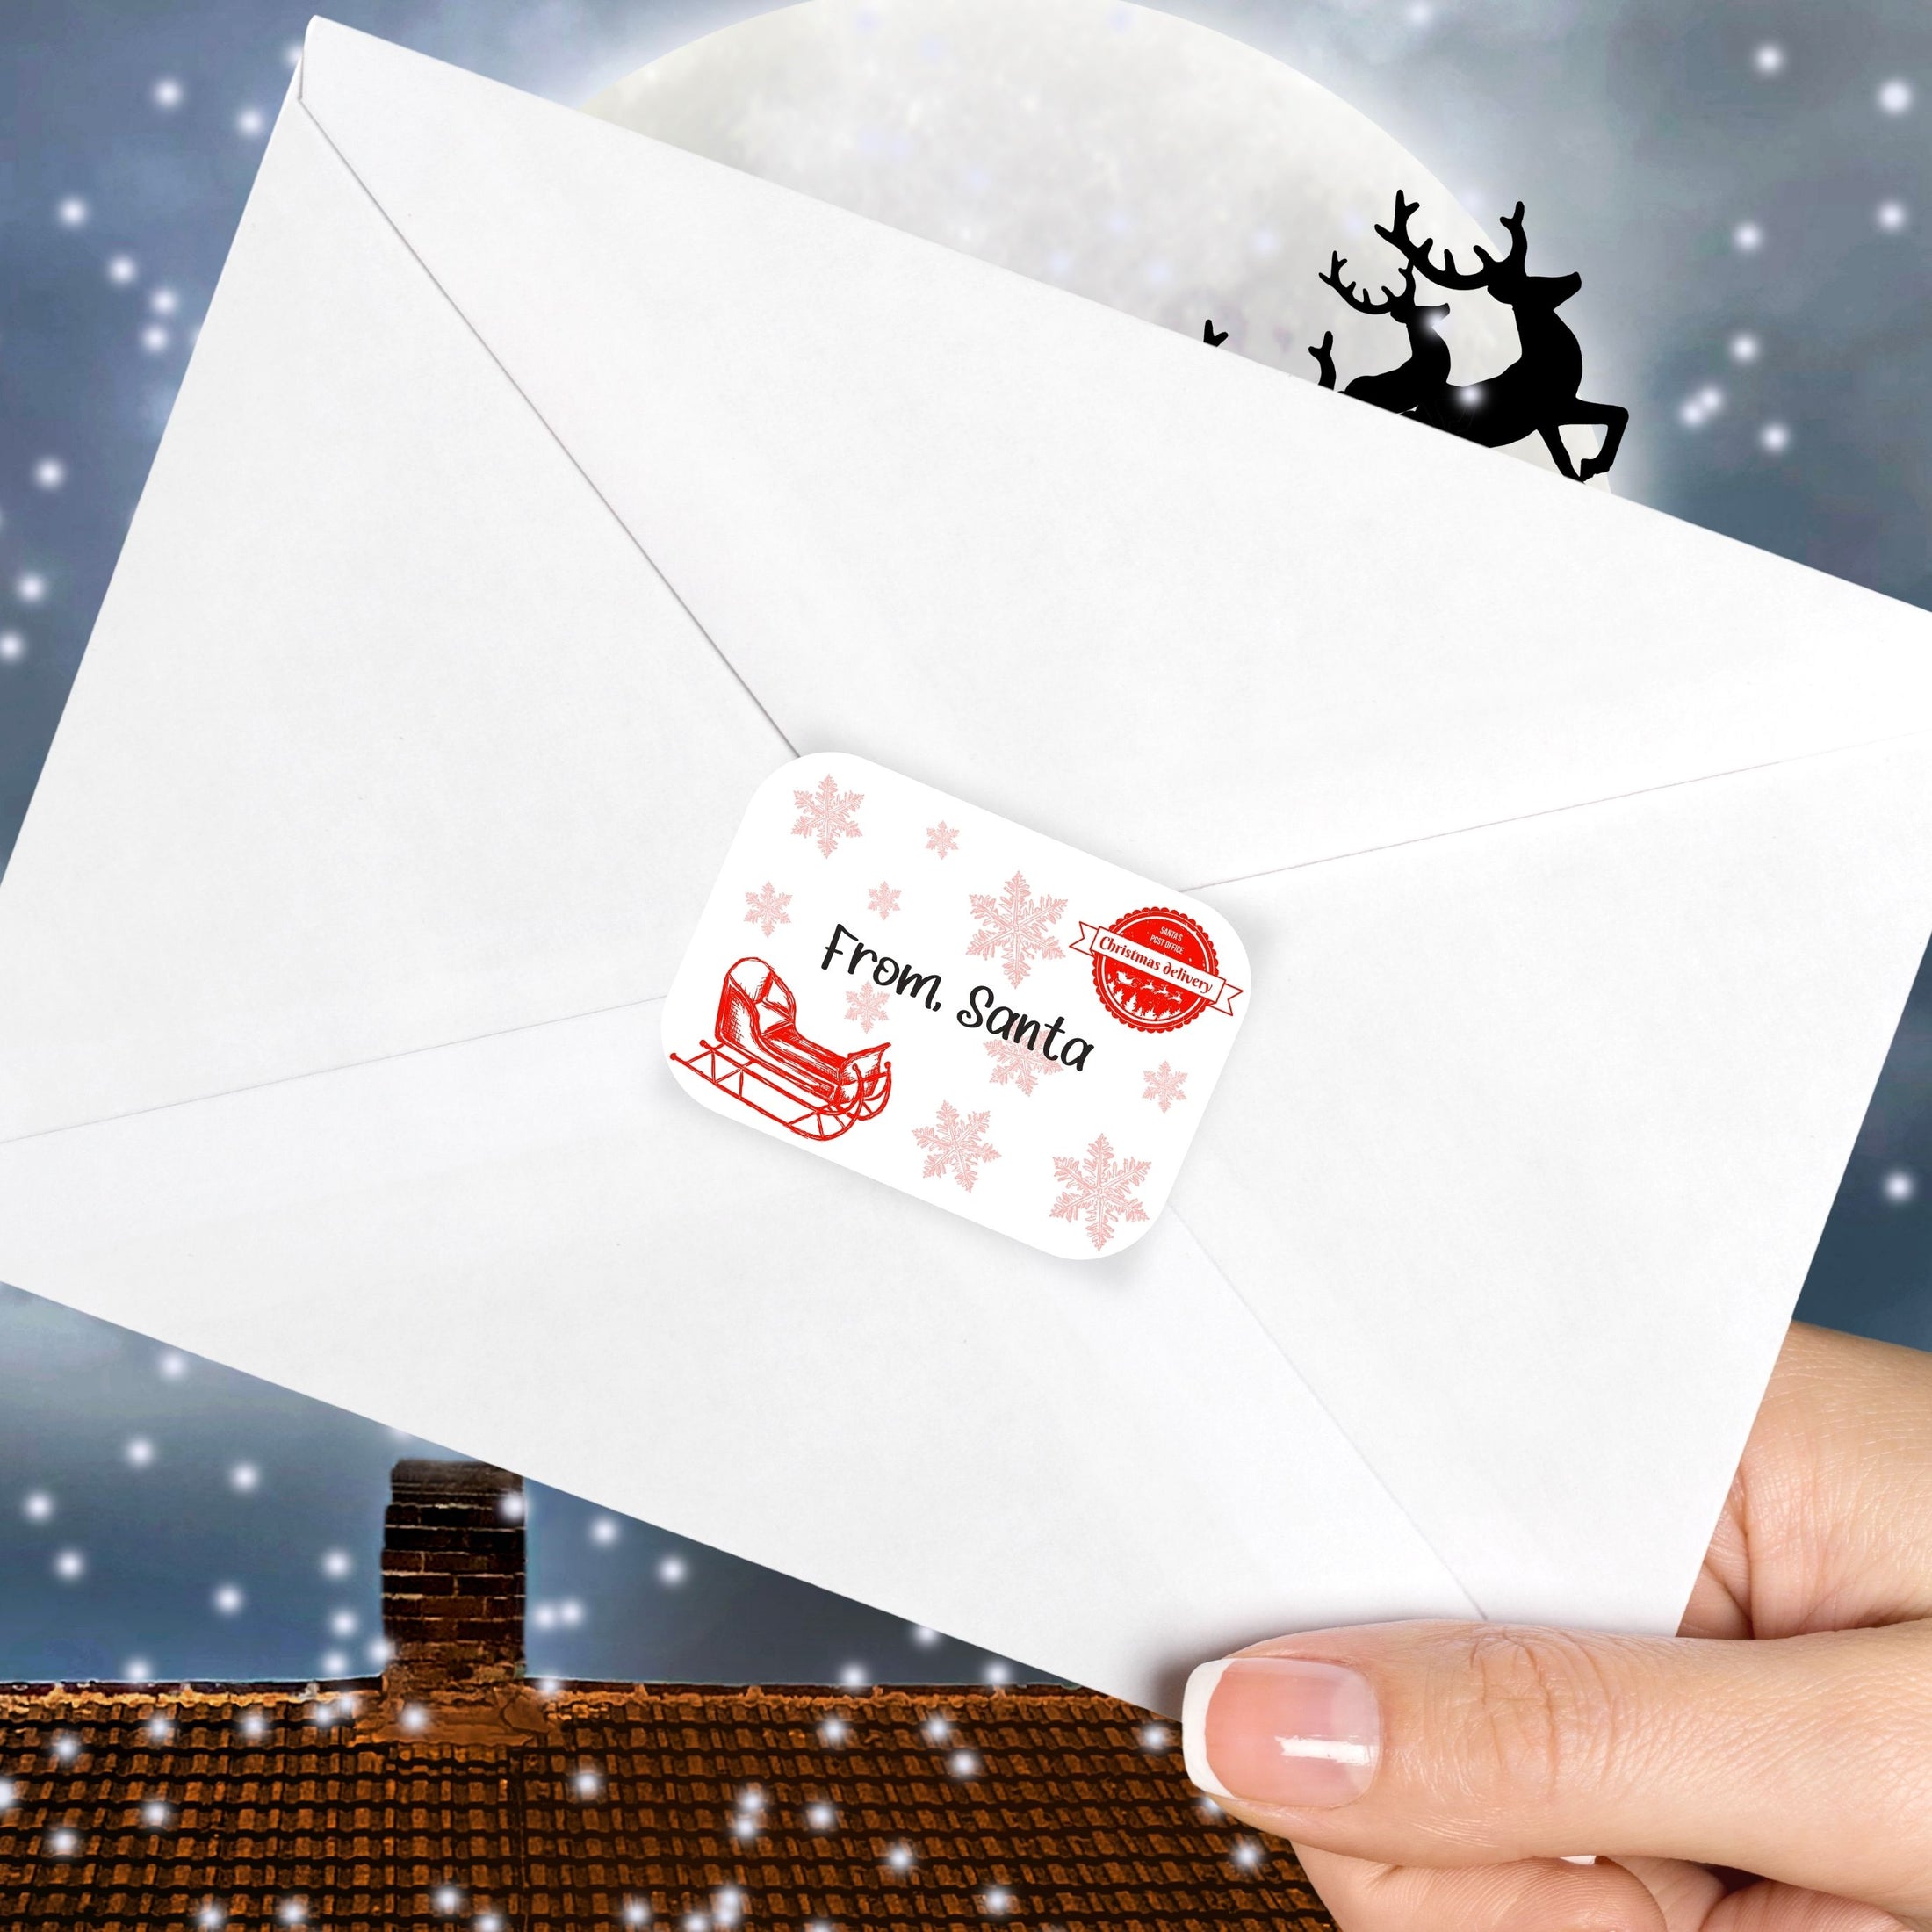 This image shows the personalized holiday sticker on the back of an envelope.